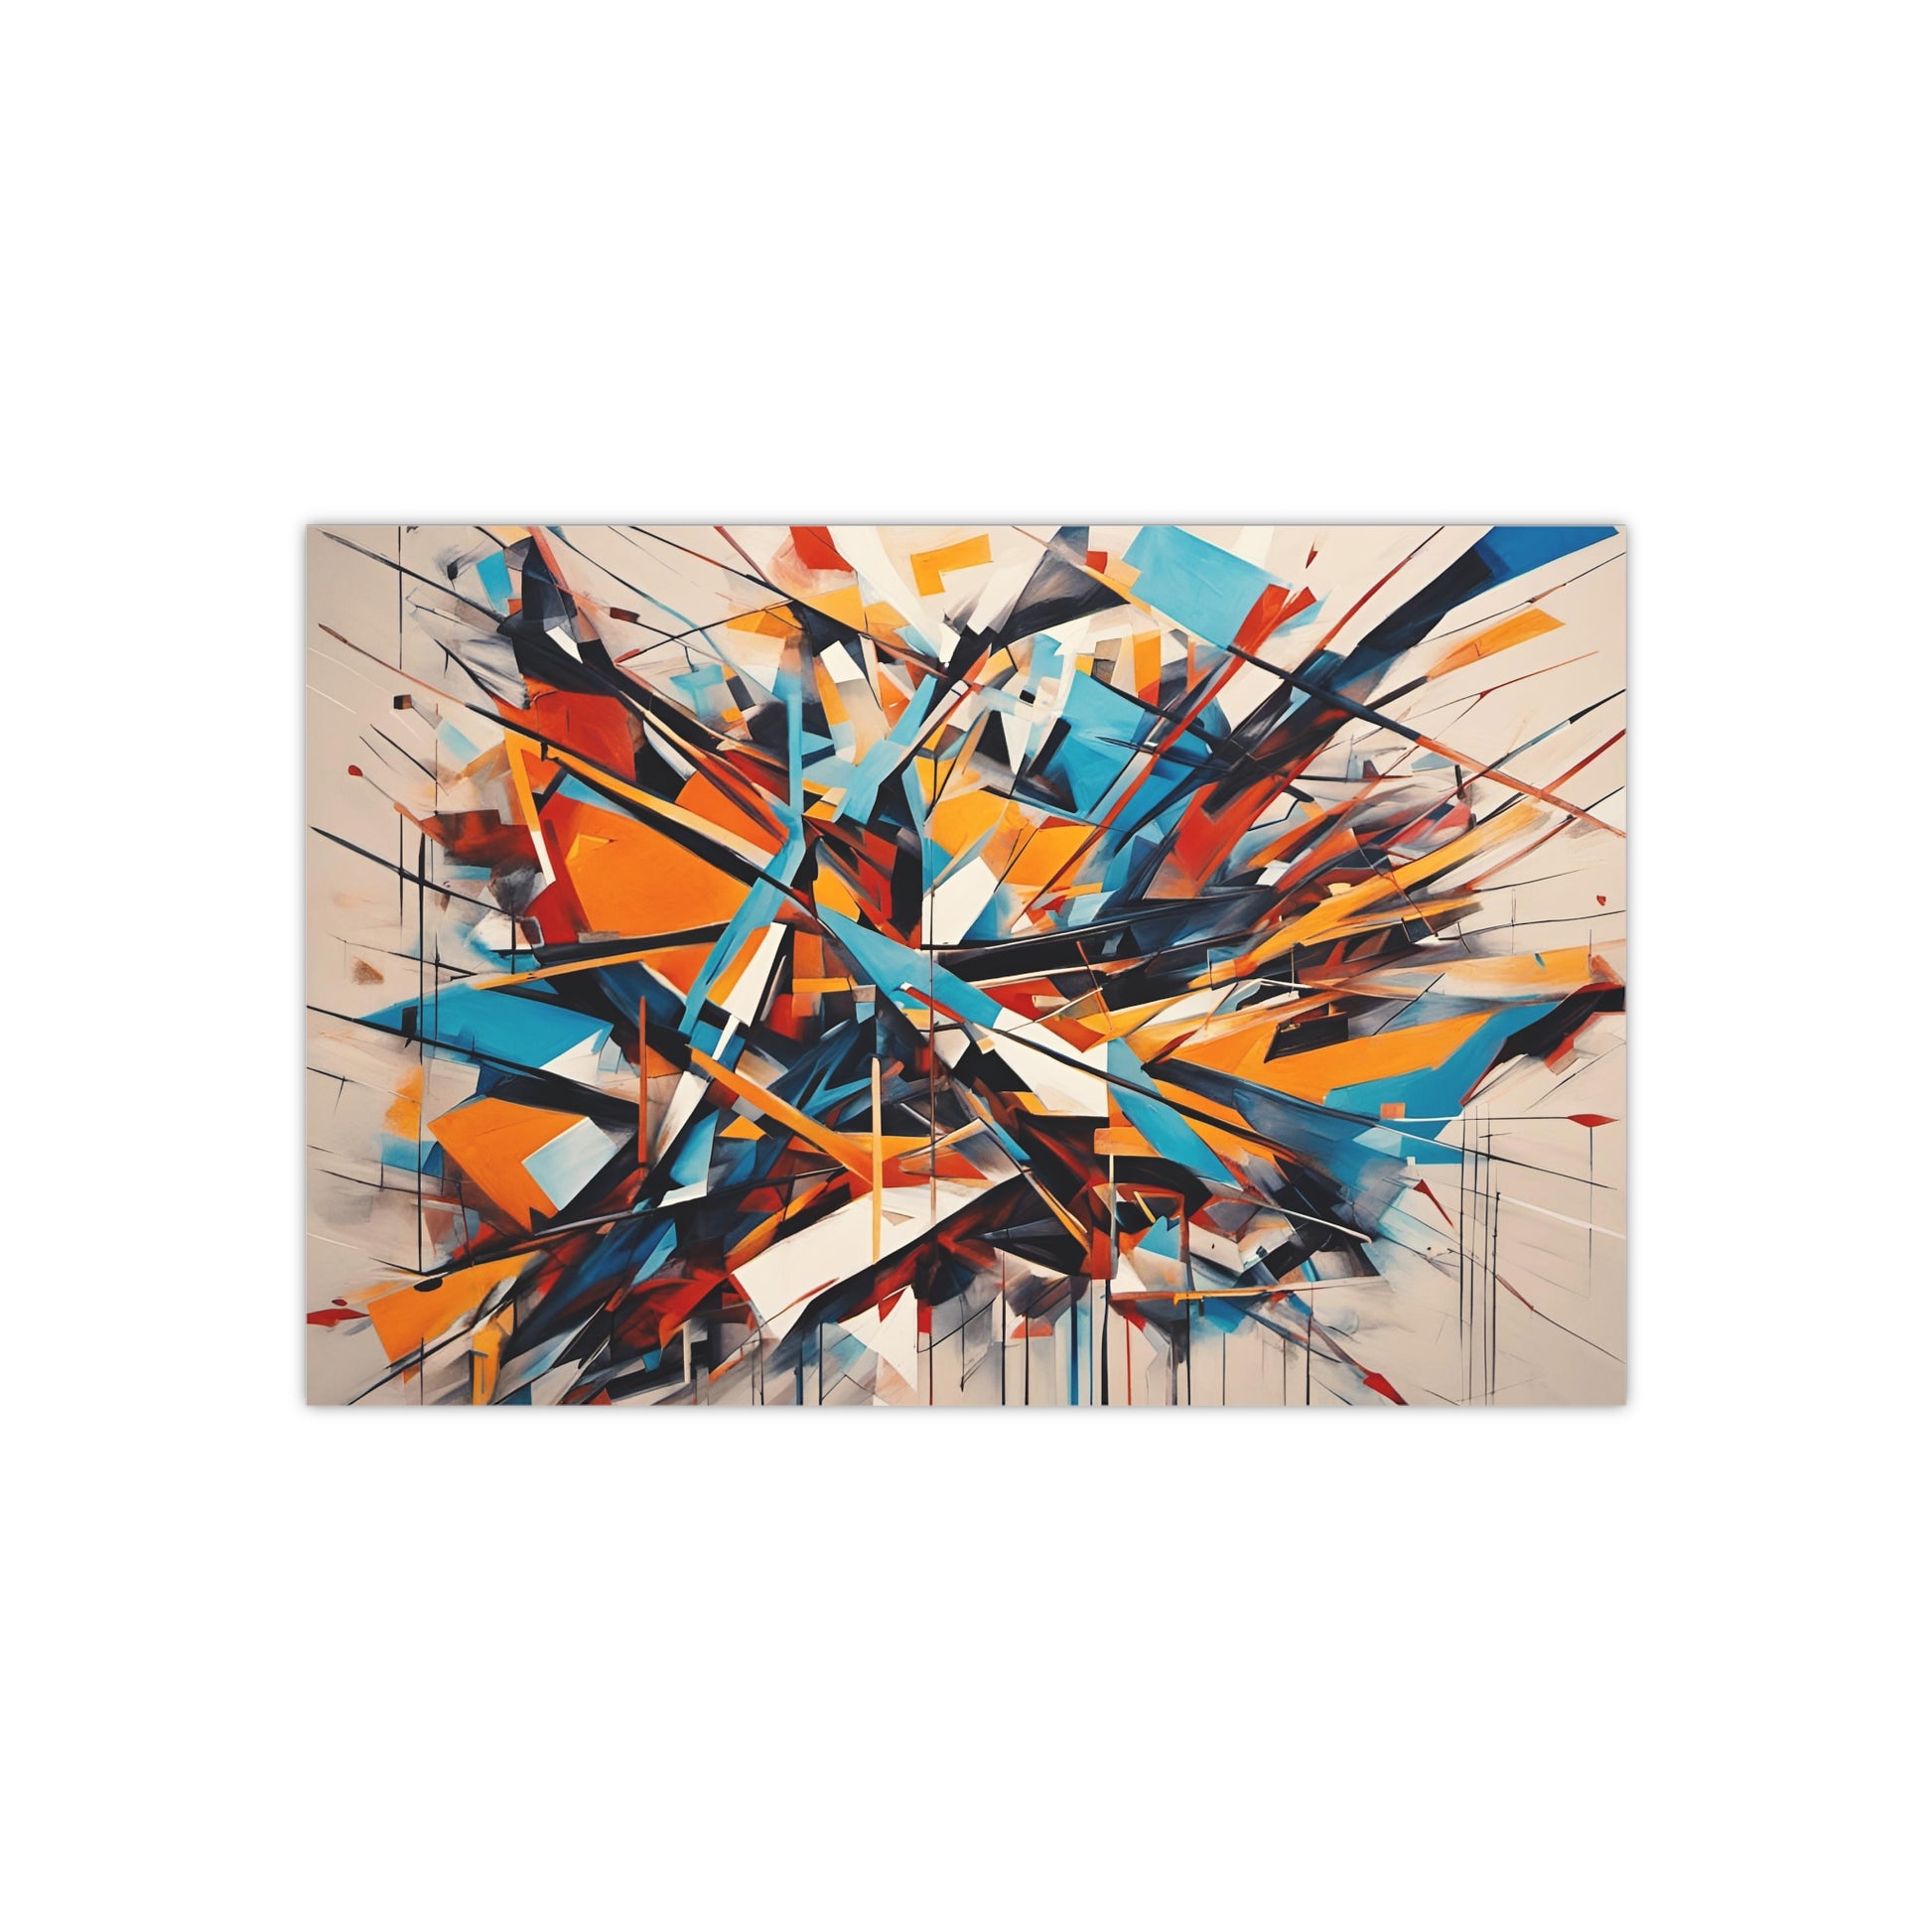 Multicolor Explosion Print on Museum-Quality Archival Paper 3 sizes available